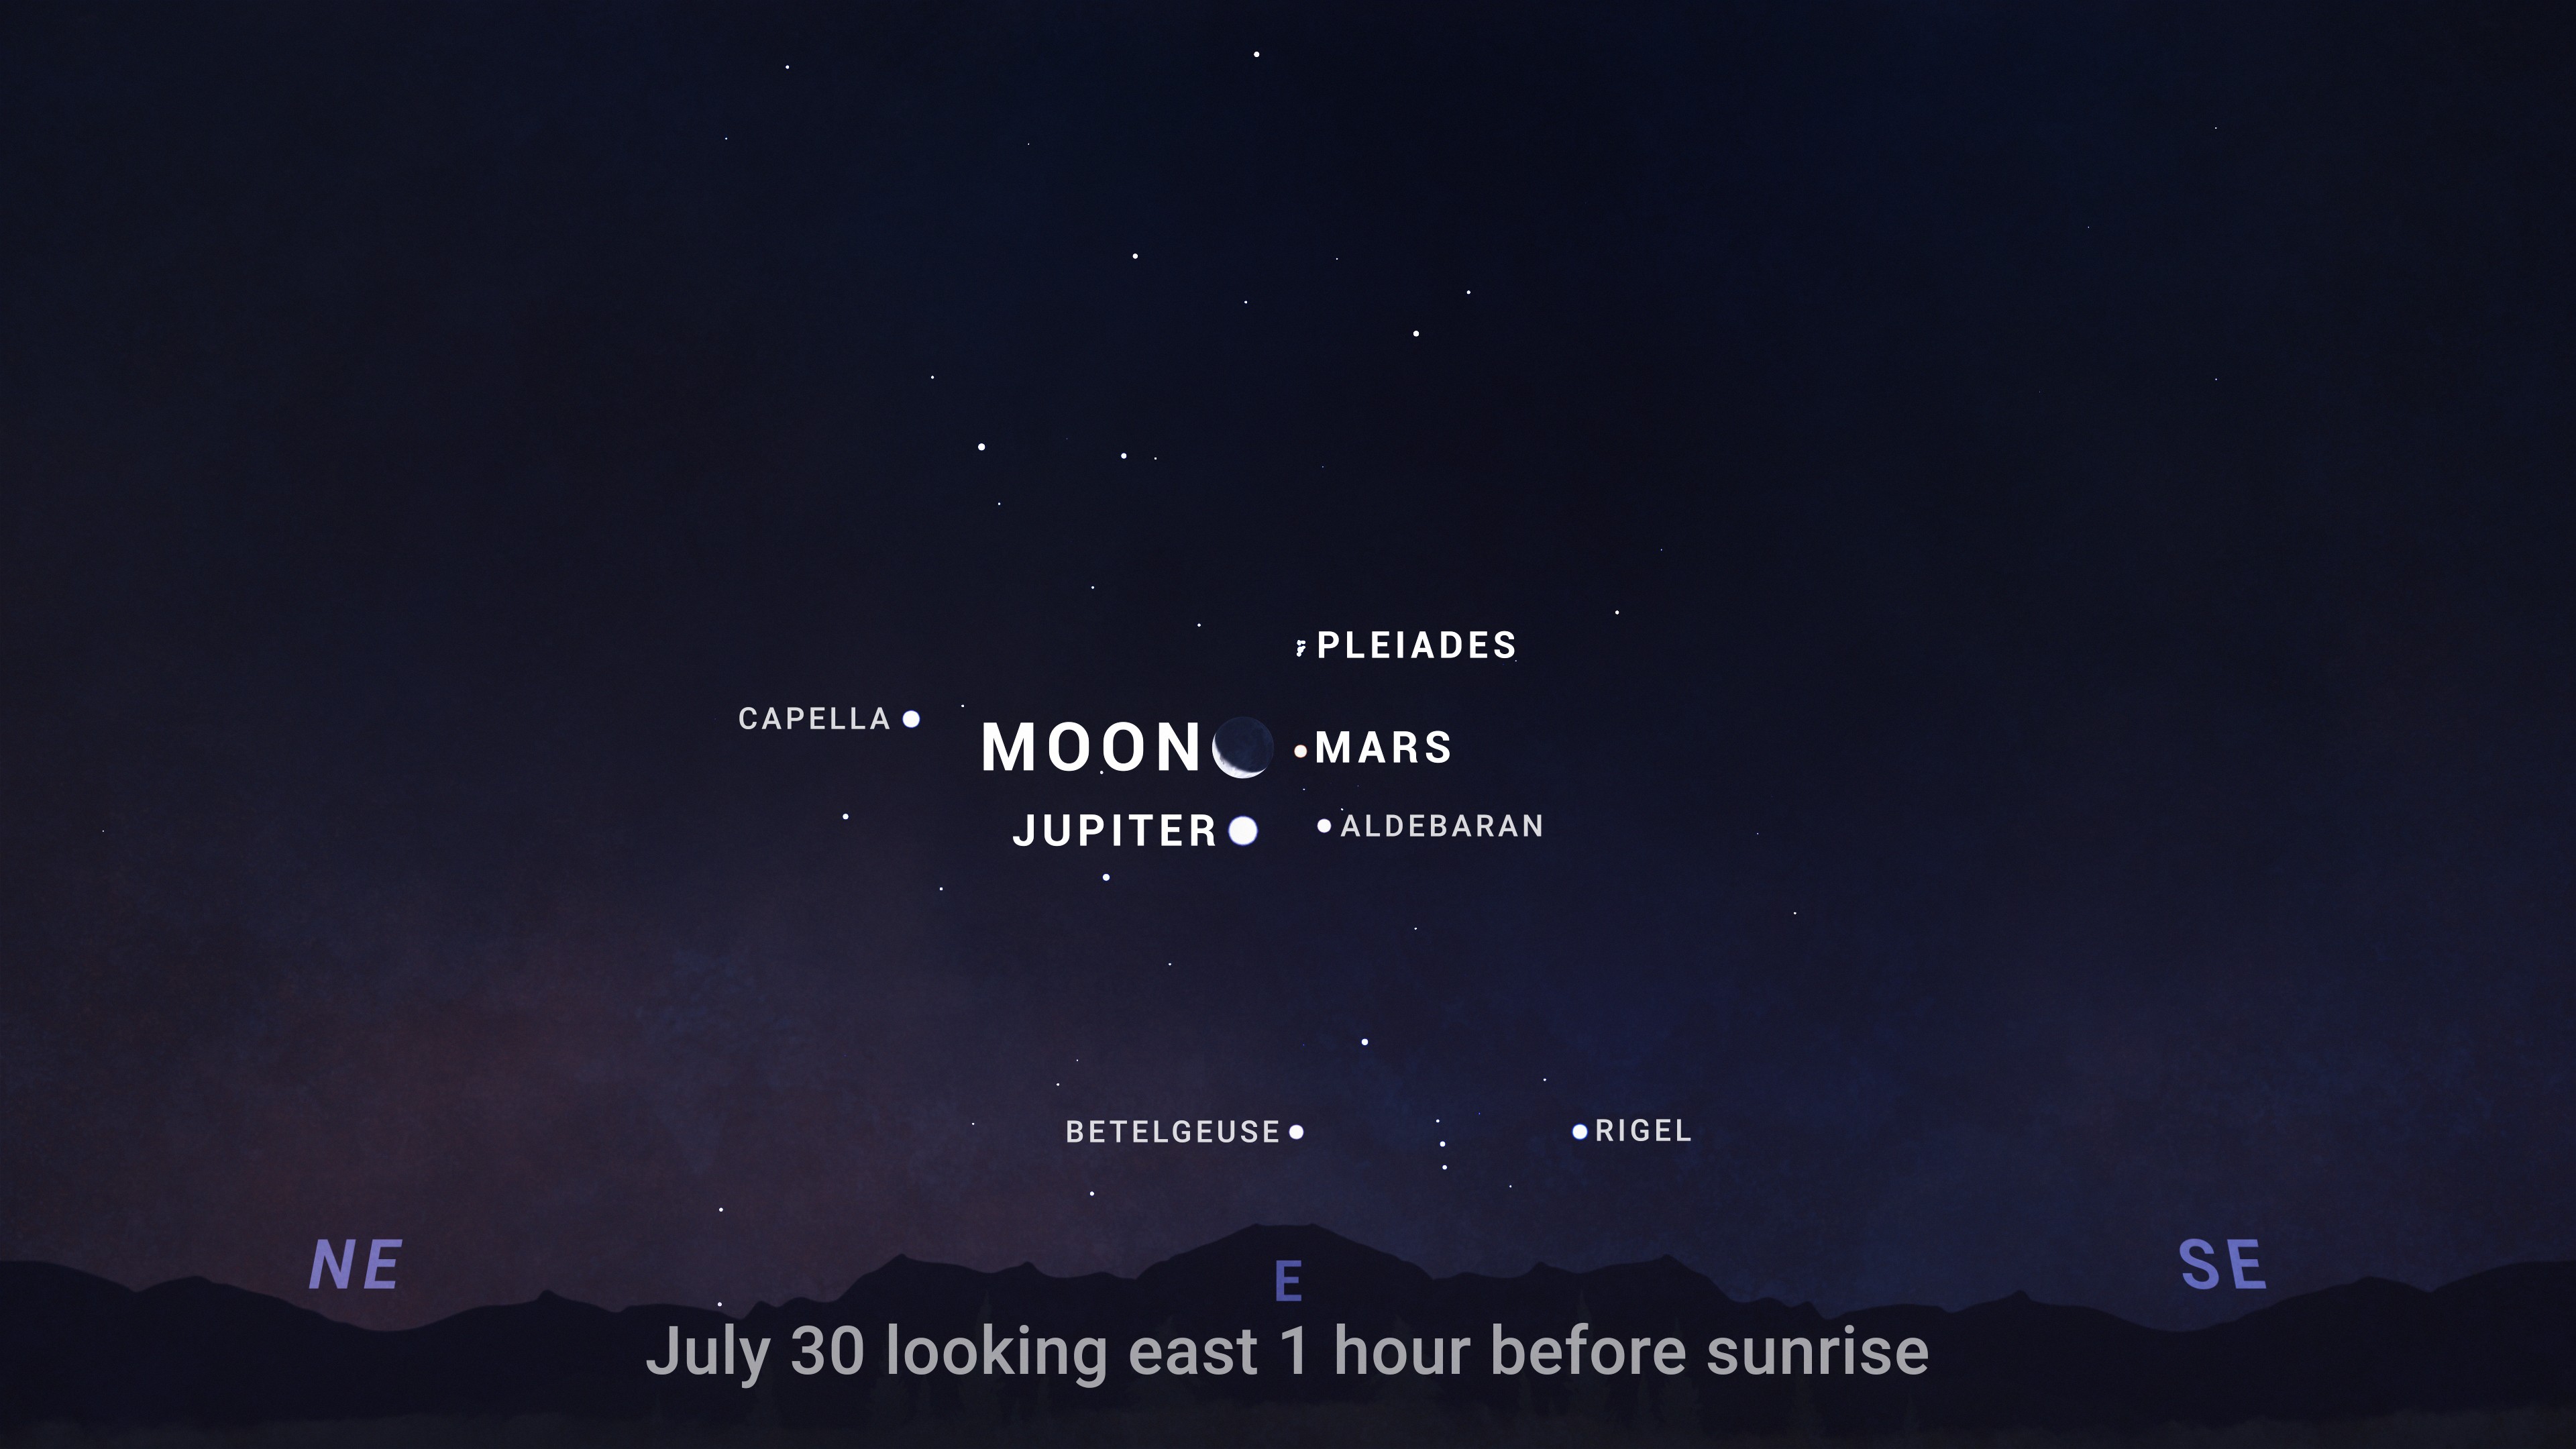 An illustrated sky chart shows the morning sky facing eastward, 1 hour before sunrise on July 30, 2024. The crescent Moon at center, surrounded by several bright stars and planets. Jupiter and Mars are pictured as small white dots, with Jupiter directly below the Moon, and Mars directly right of the Moon. Jupiter appears larger than Mars, indicating its greater brightness.